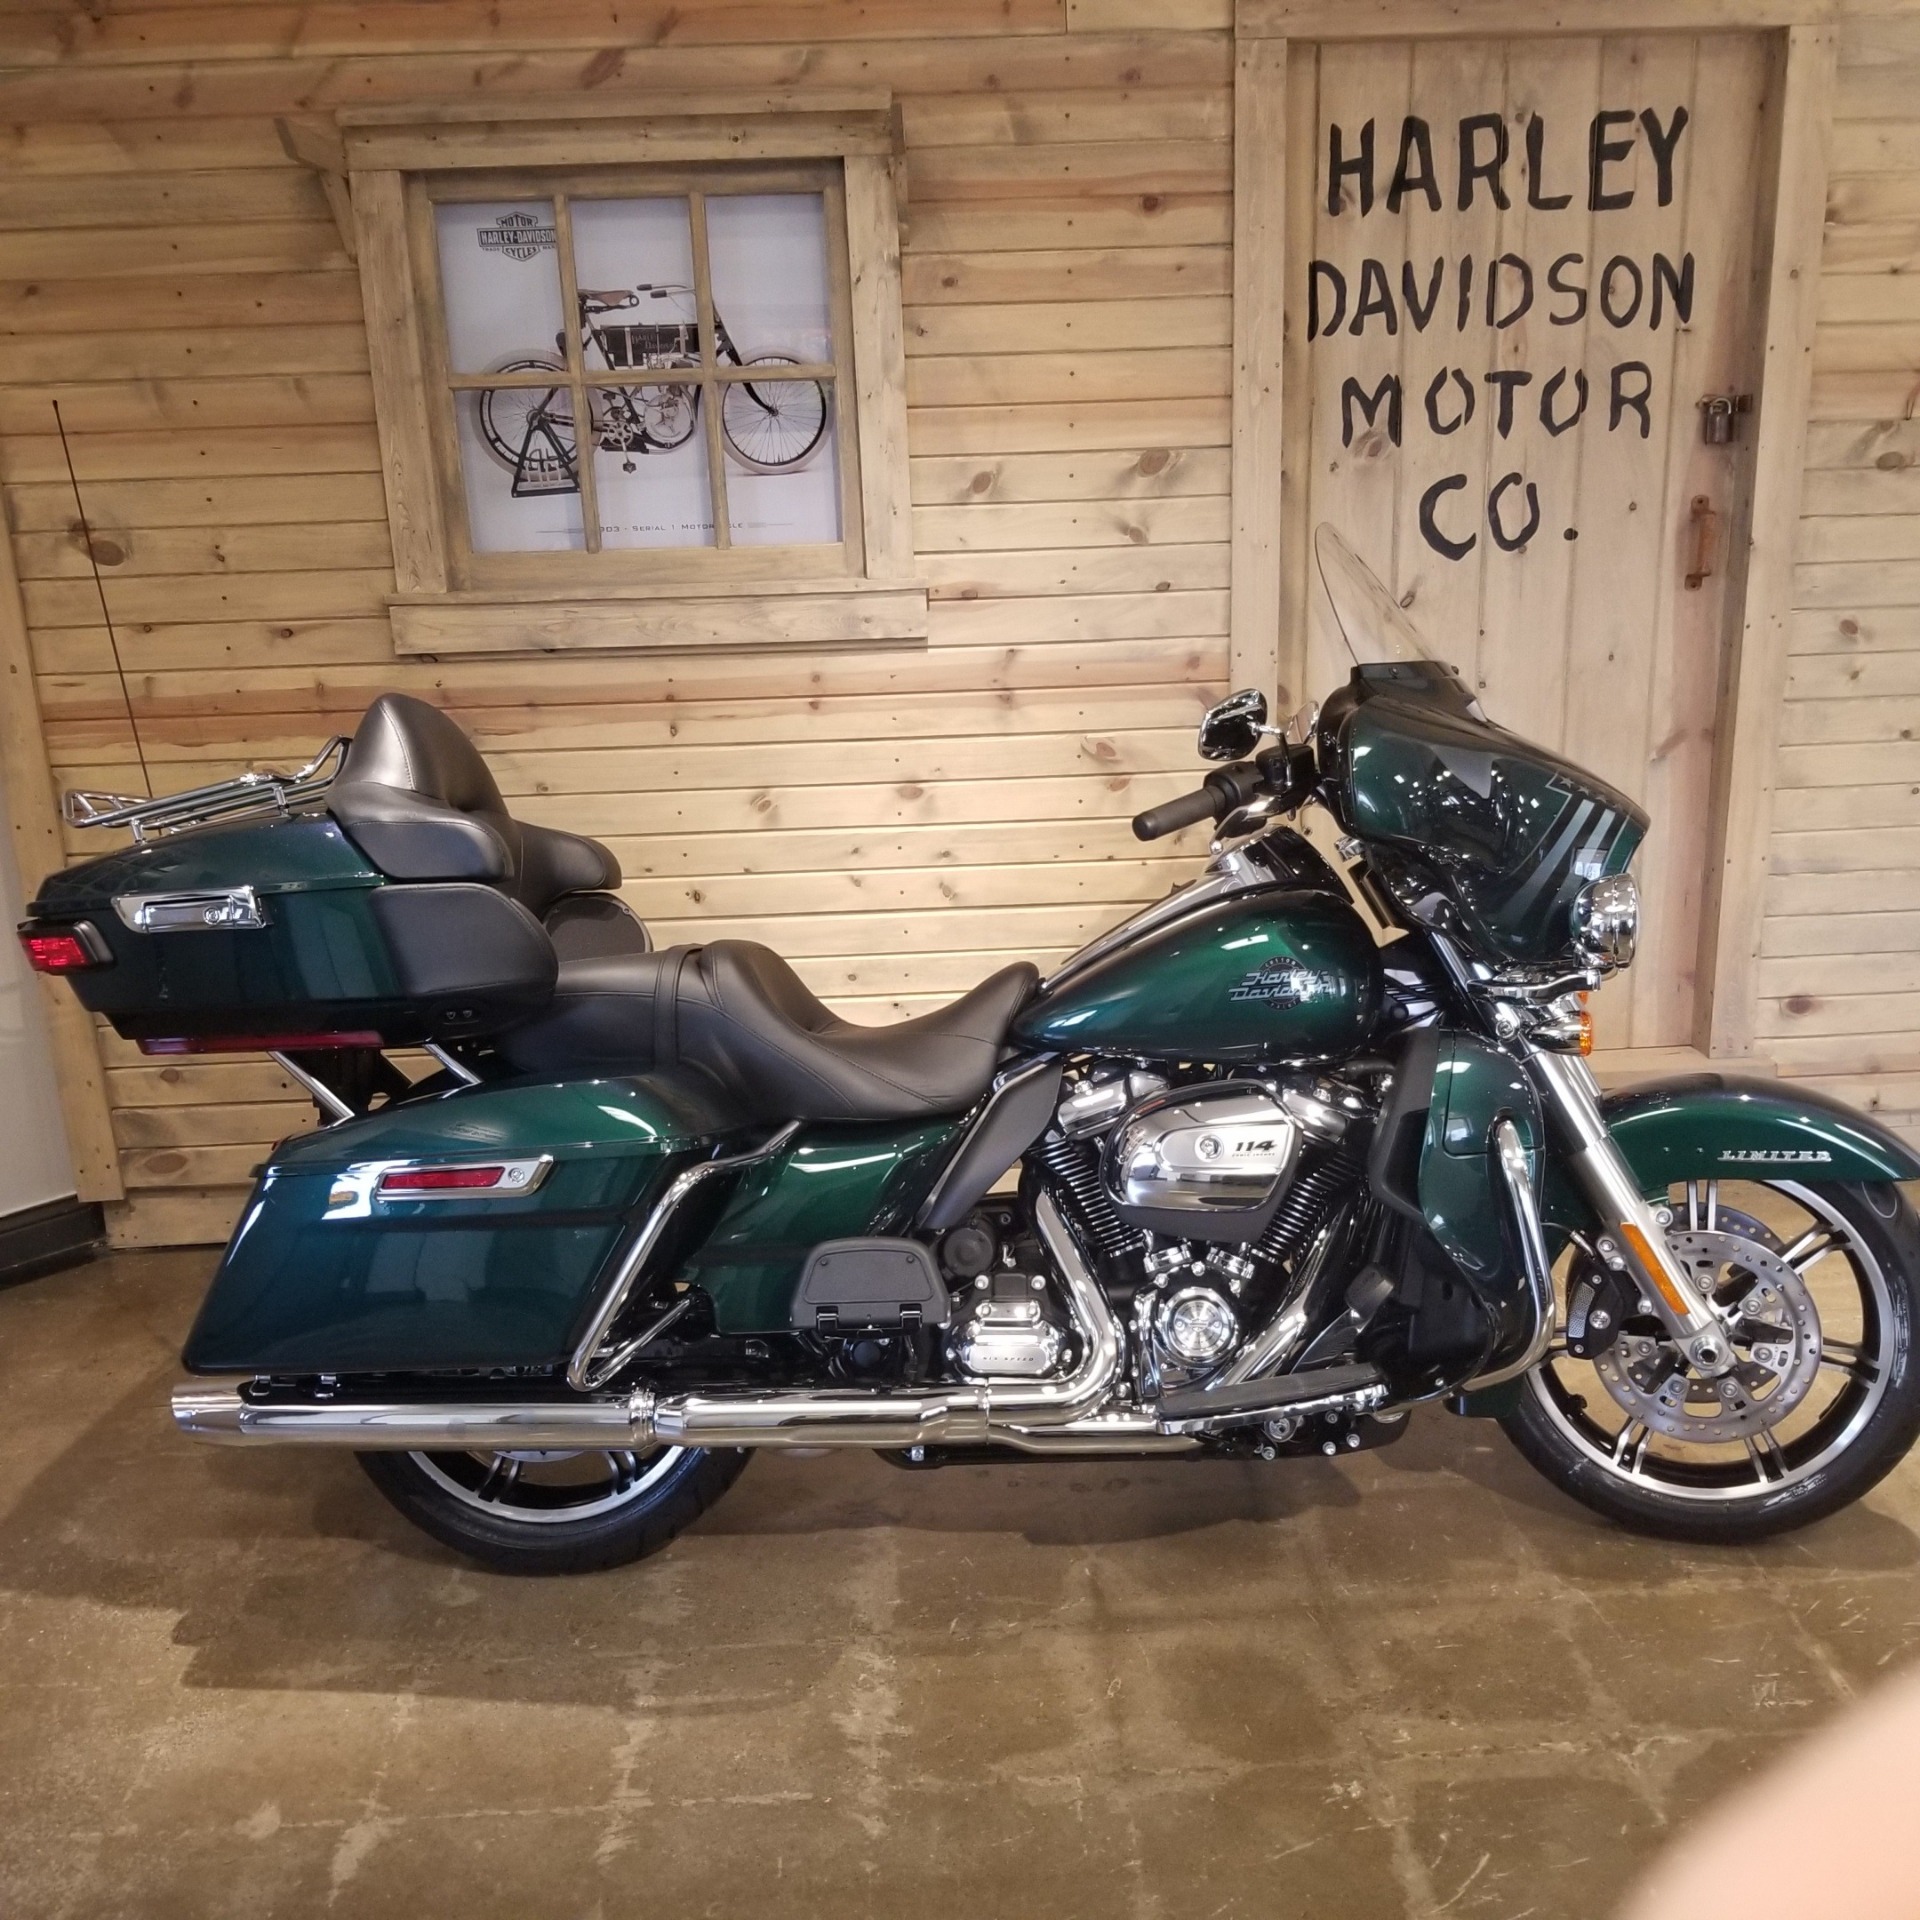 New 2021 Harley Davidson Ultra Limited Motorcycles In Mentor Oh Stock Number 1405